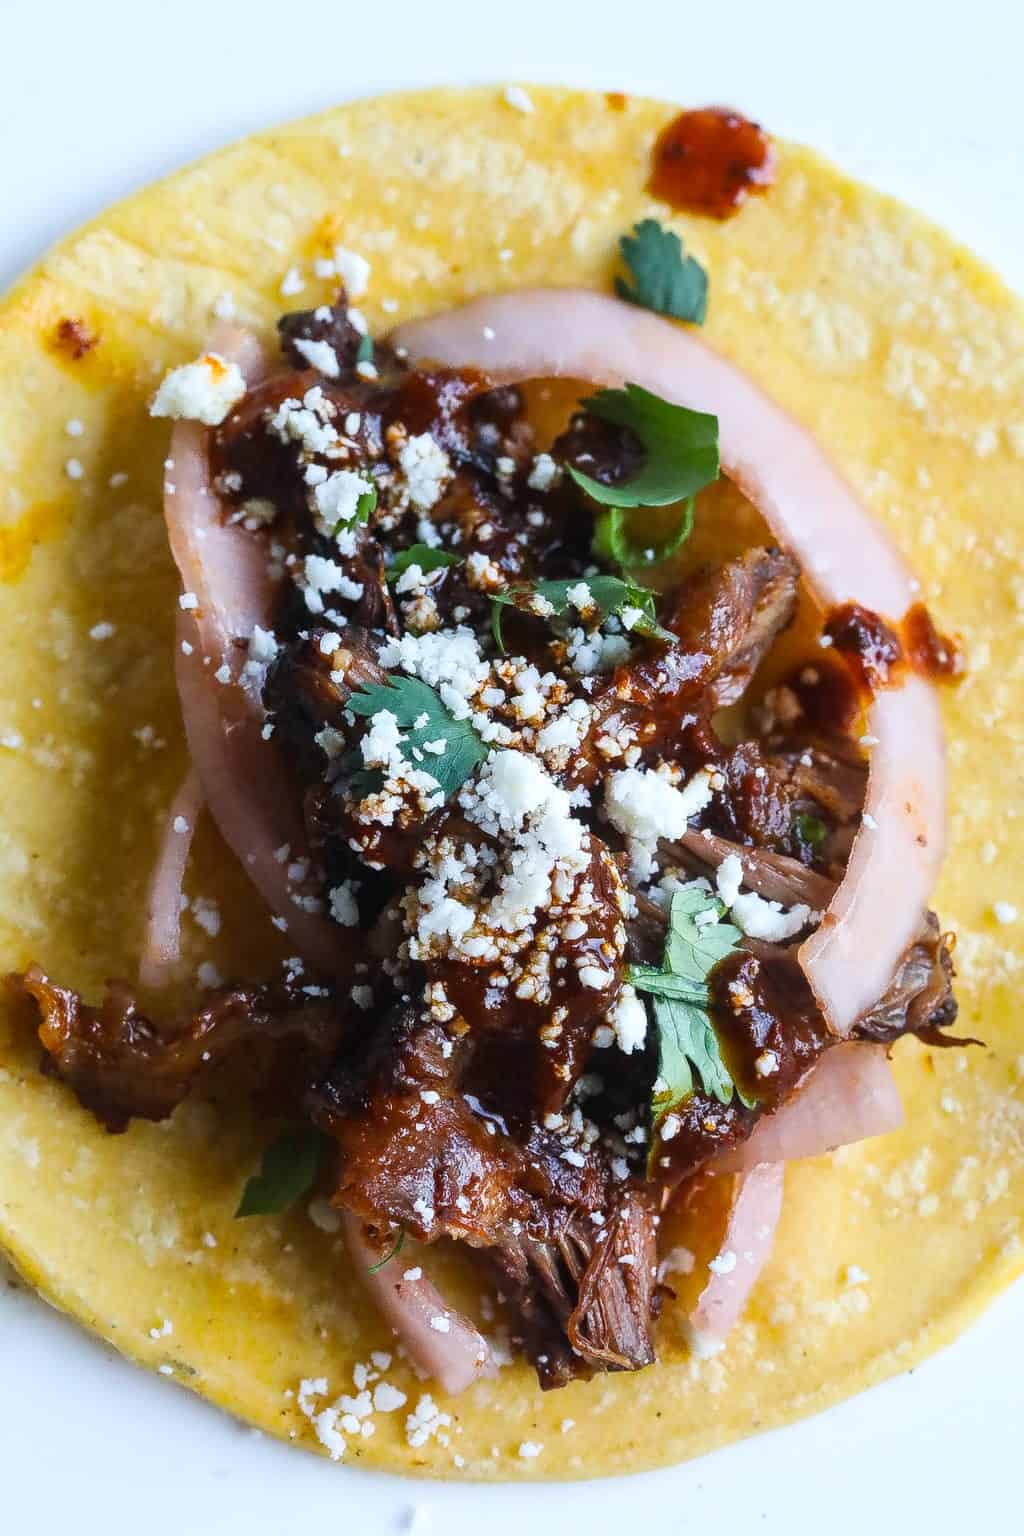 tacos made with braised beef oxtails